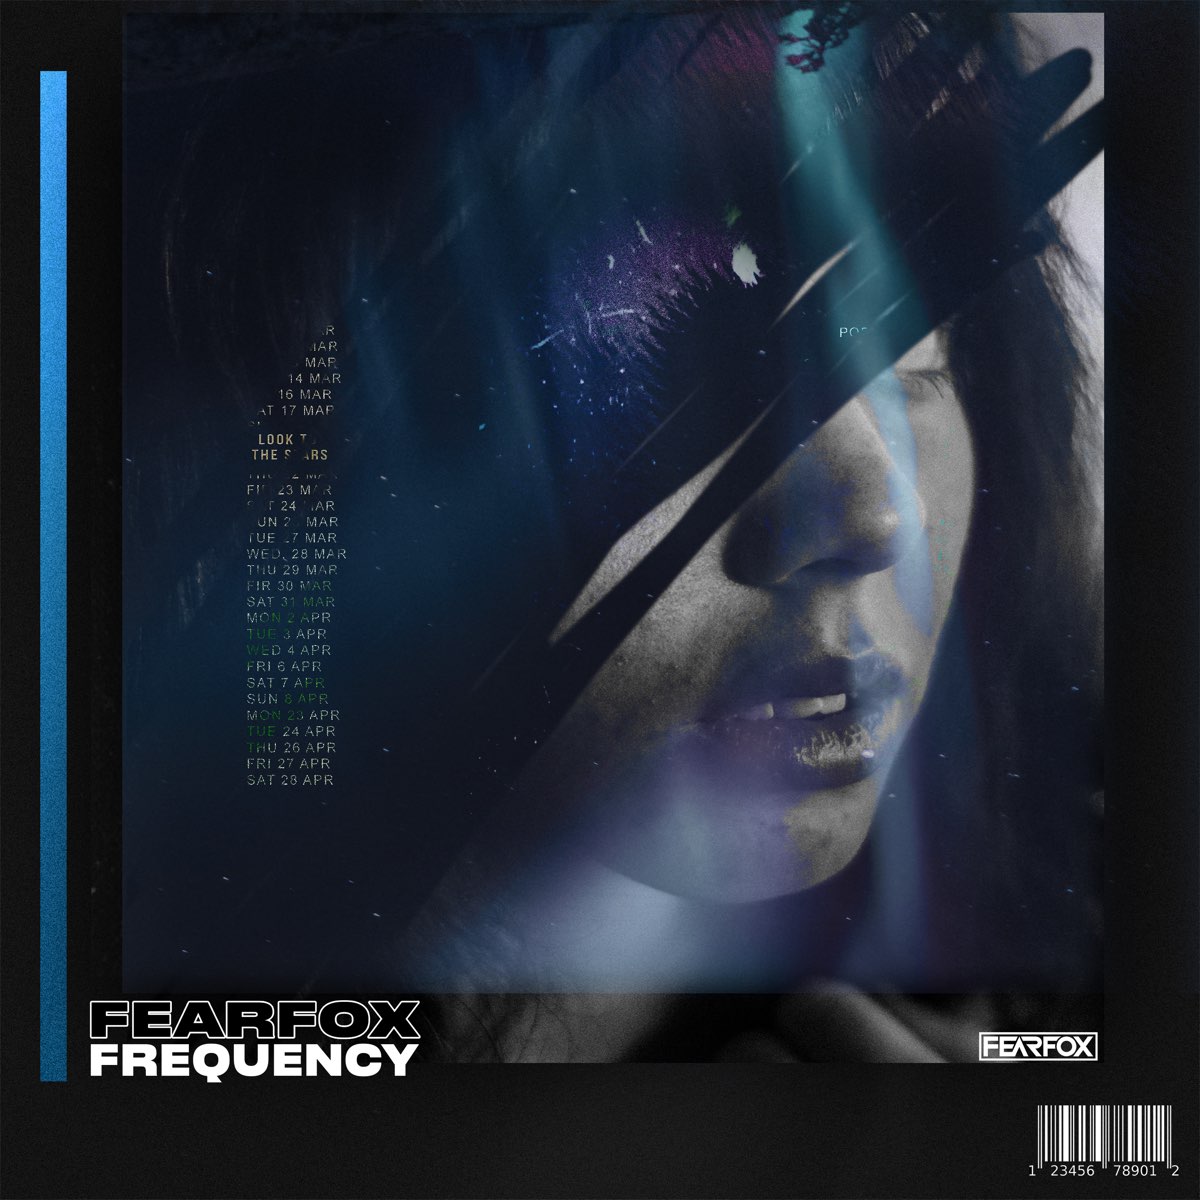 Альбом Frequency. Frequencies песня. Breath Frequency Music. Frequency песня